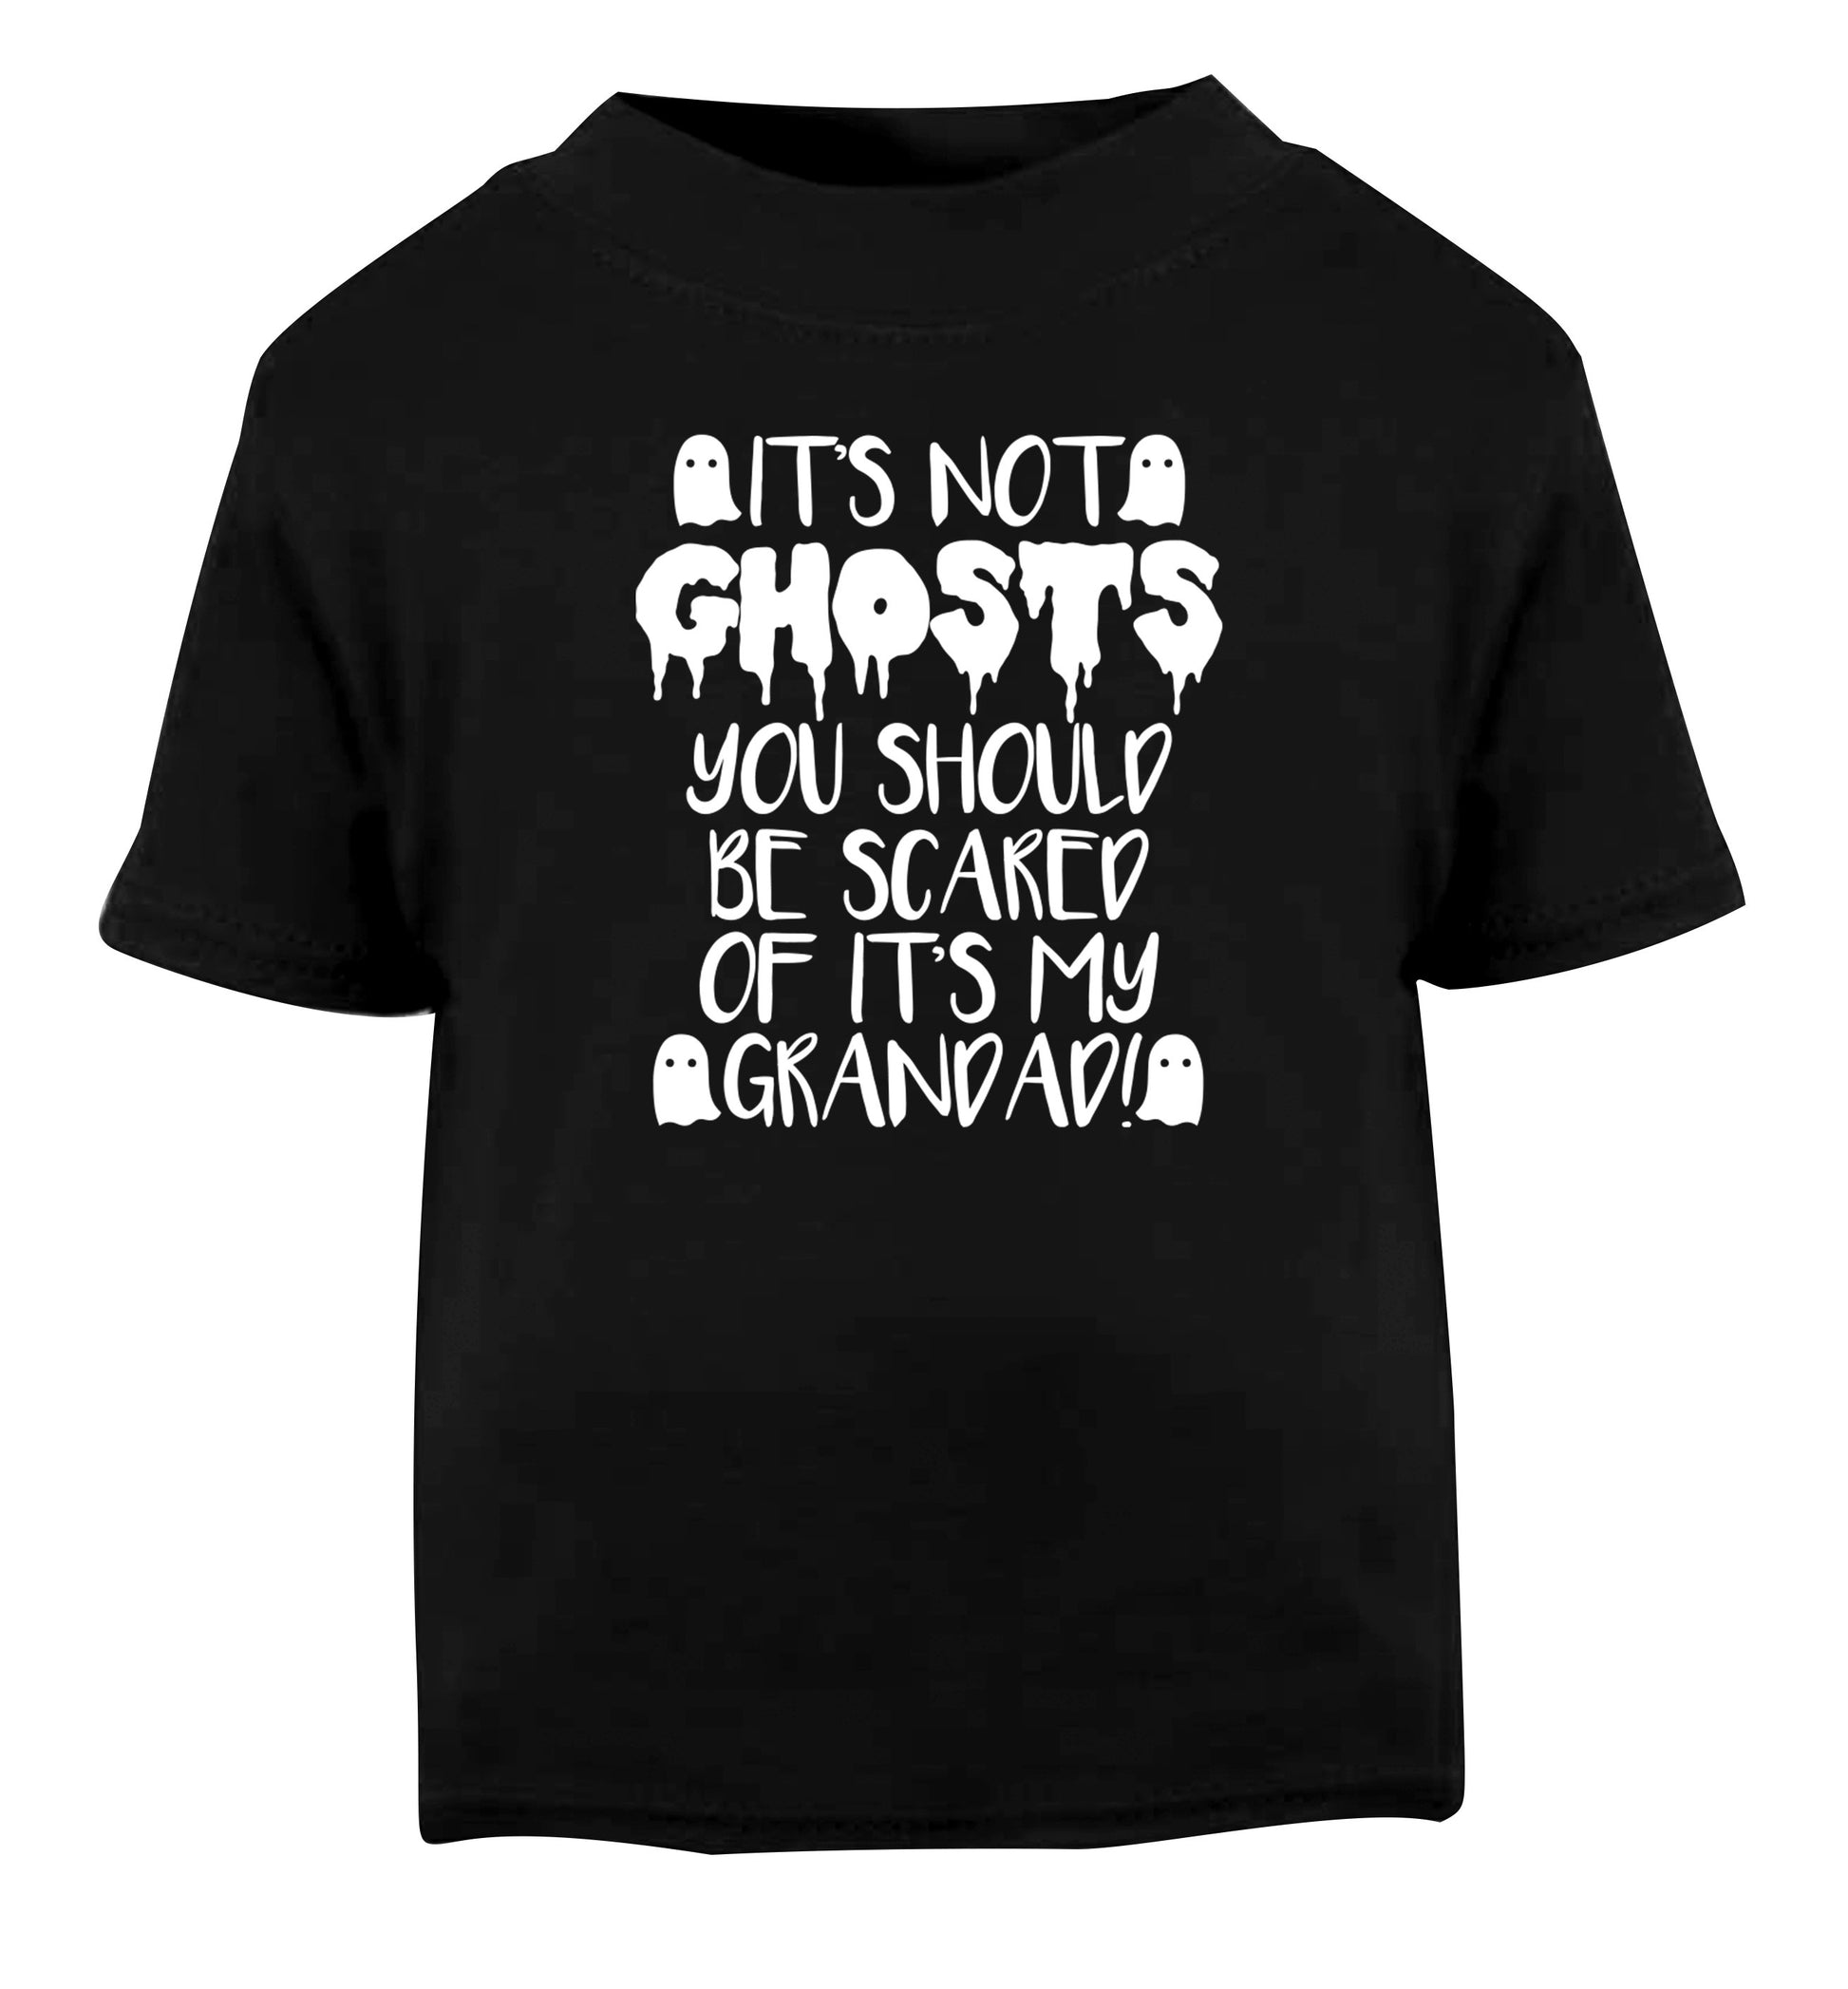 It's not ghosts you should be scared of it's my grandad! Black Baby Toddler Tshirt 2 years